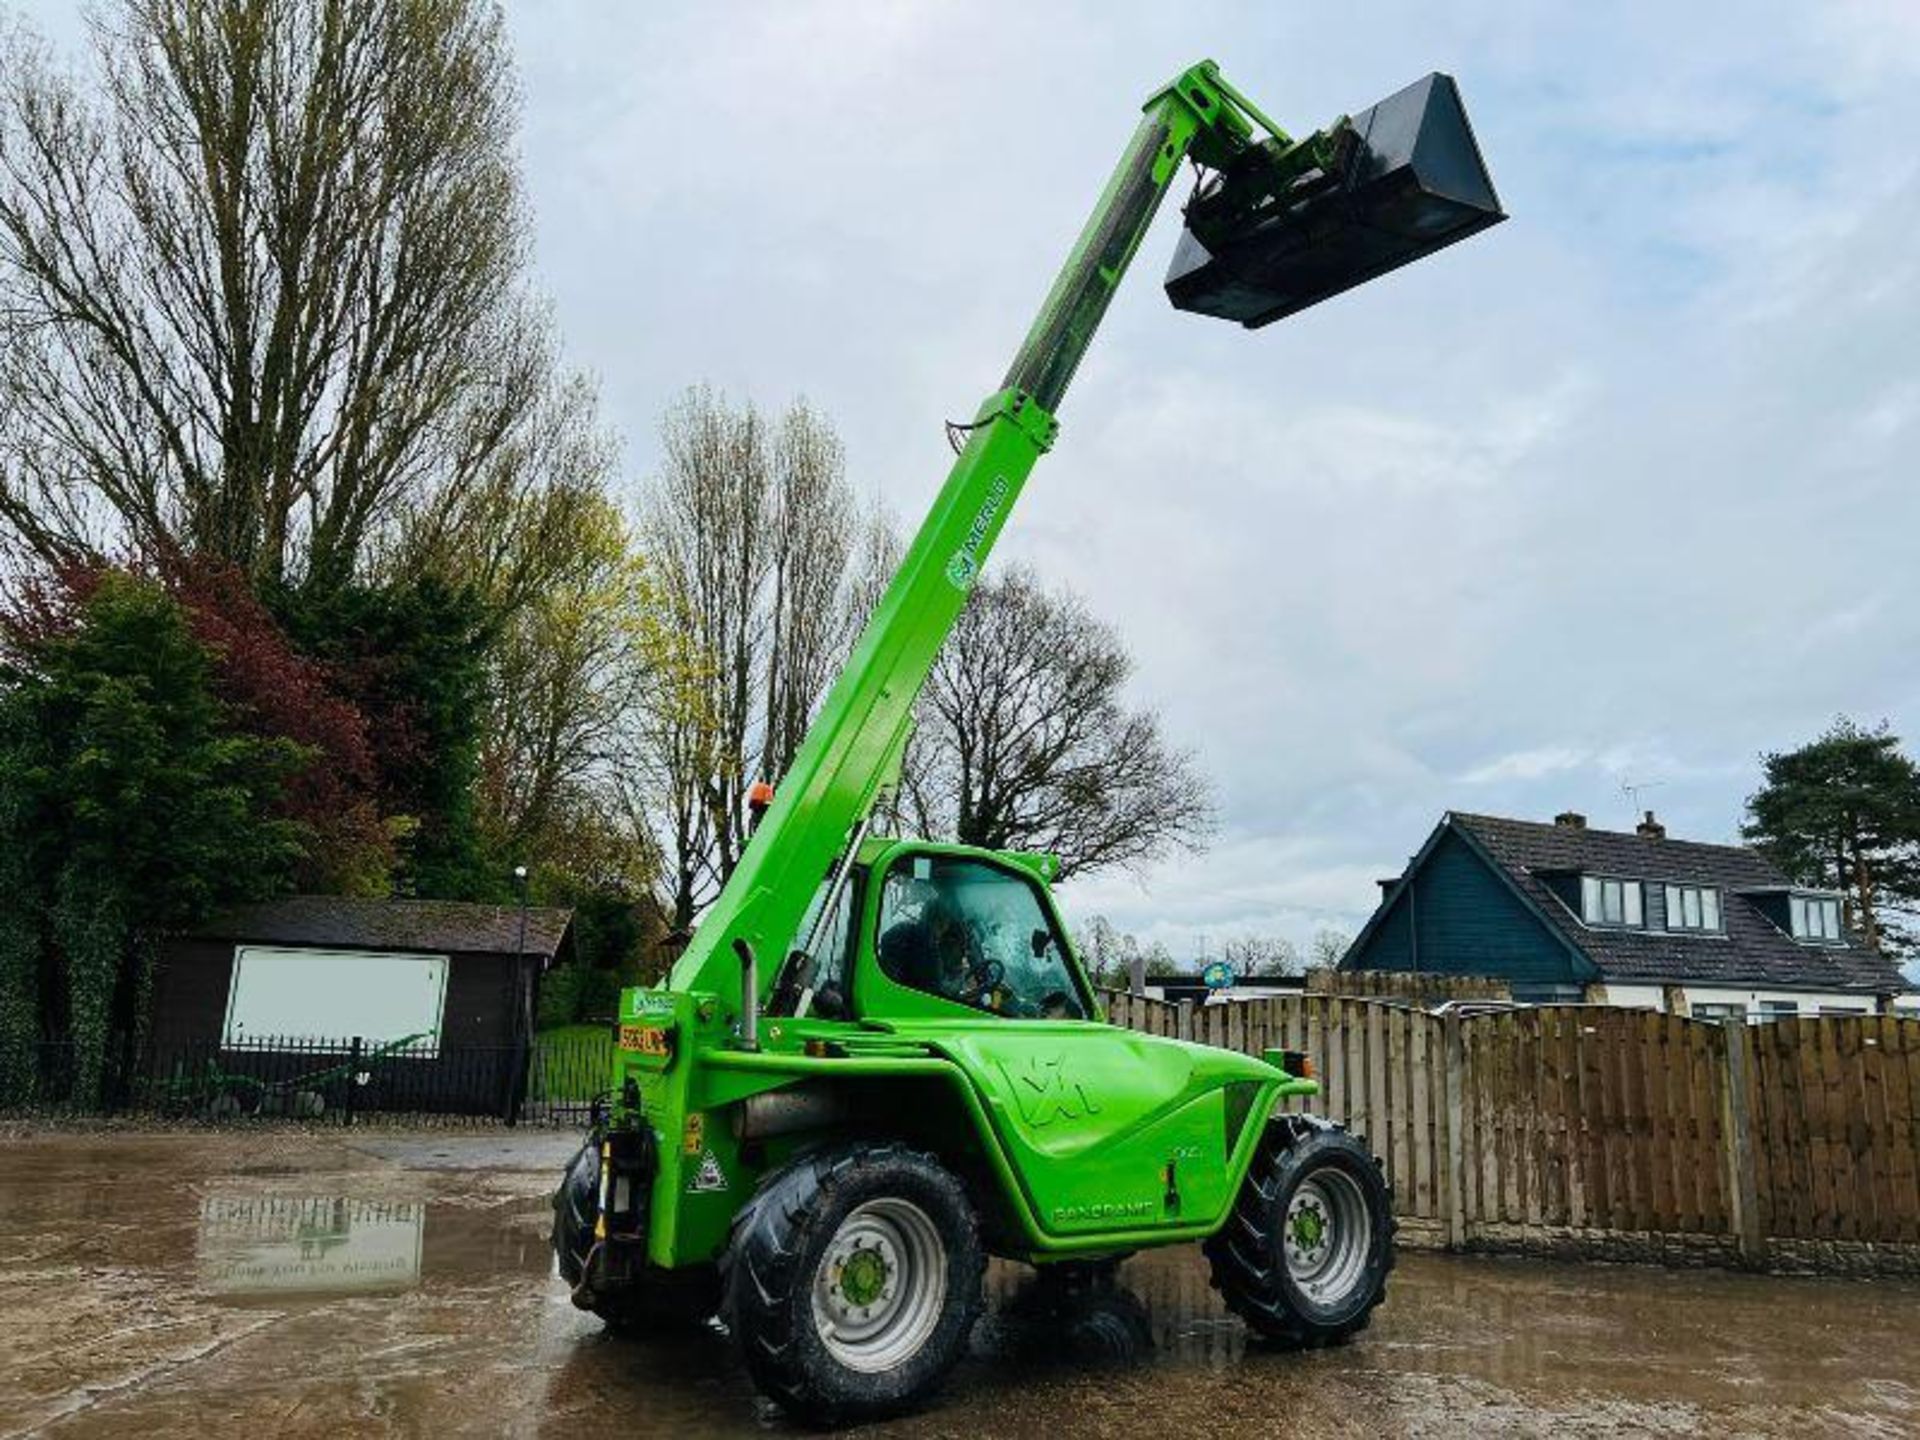 MERLO P34.7 4WD TELEHANDLER*YEAR 2013, AG SPEC* C/W PICK UP HITCH - Image 6 of 20